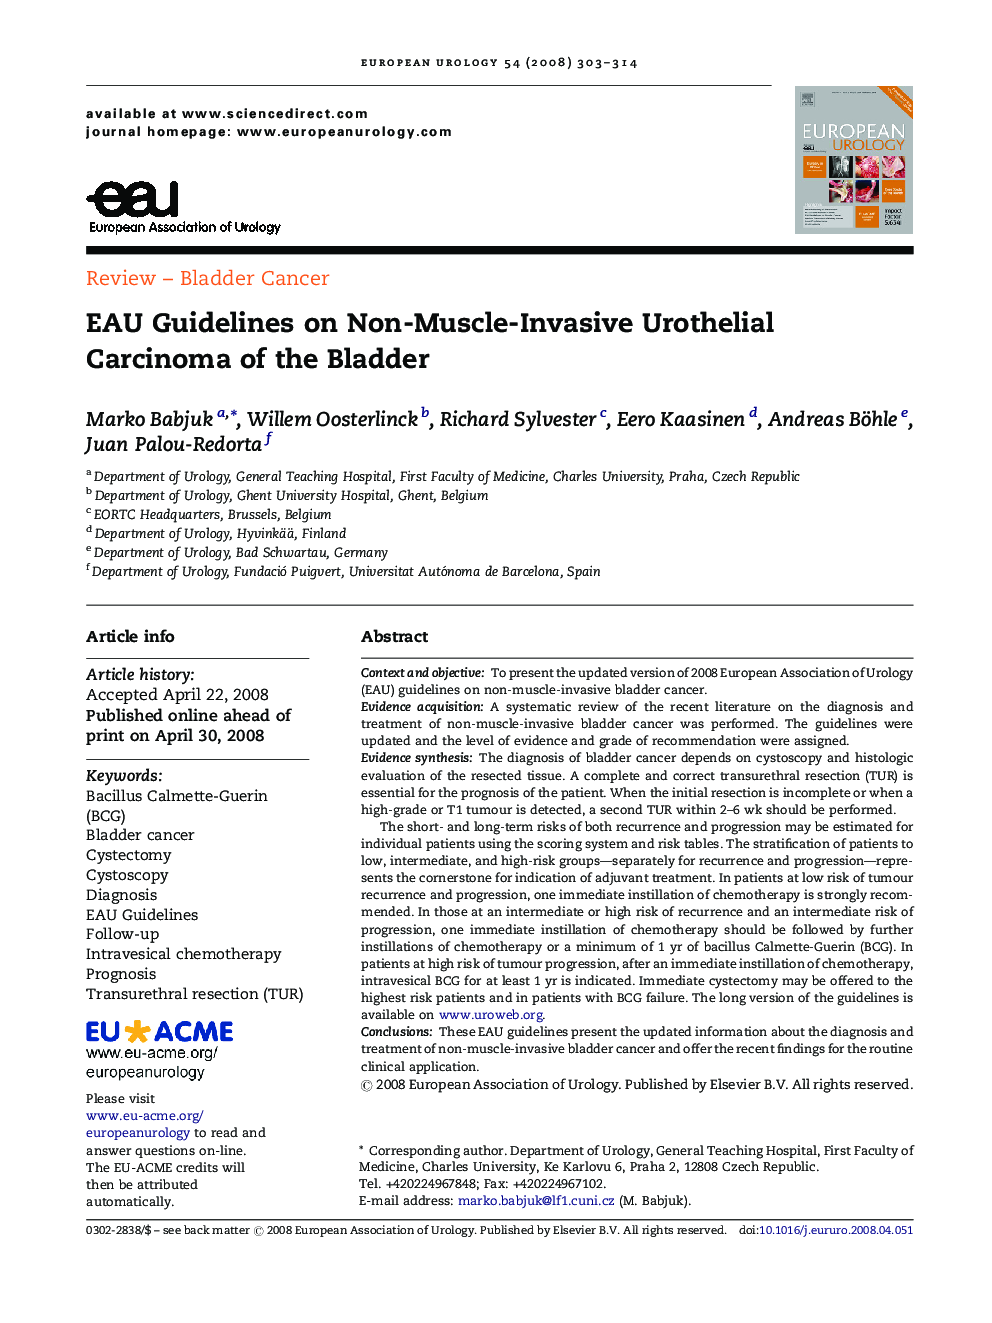 EAU Guidelines on Non-Muscle-Invasive Urothelial Carcinoma of the Bladder 